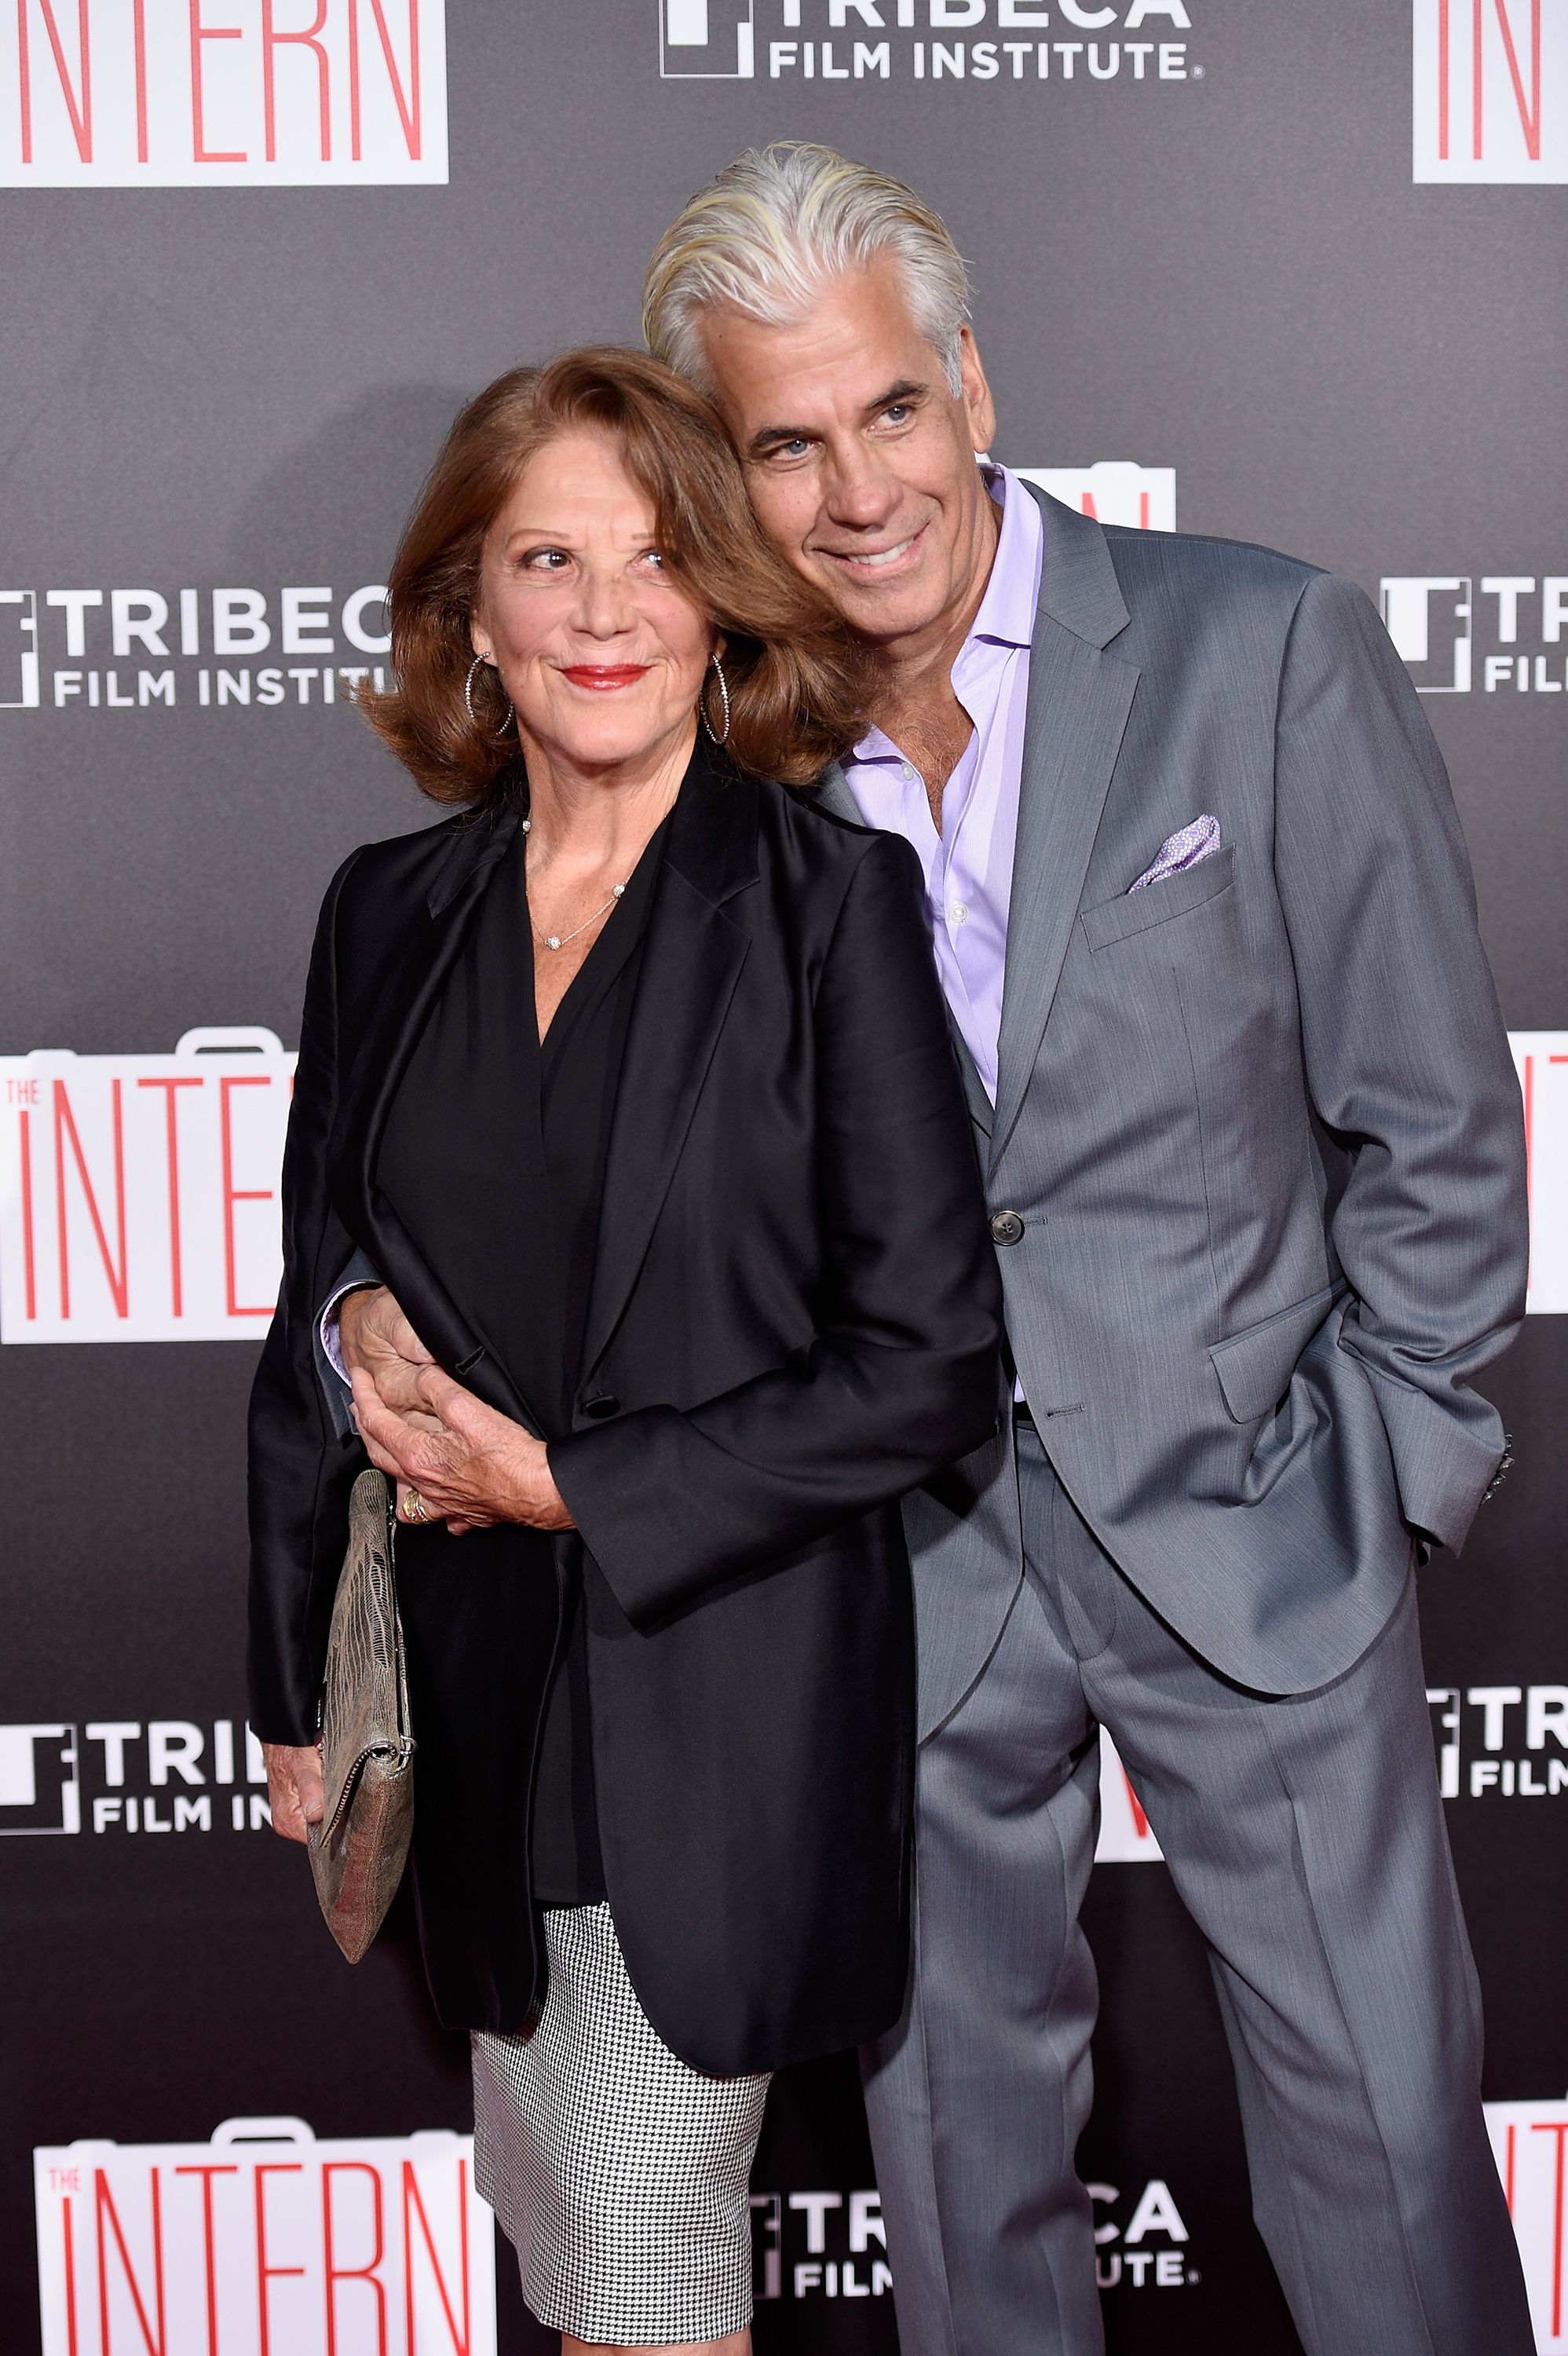 Linda Lavin and Steve Bakunas at New York premiere of "The Intern" in 2015 | Source: Getty Images